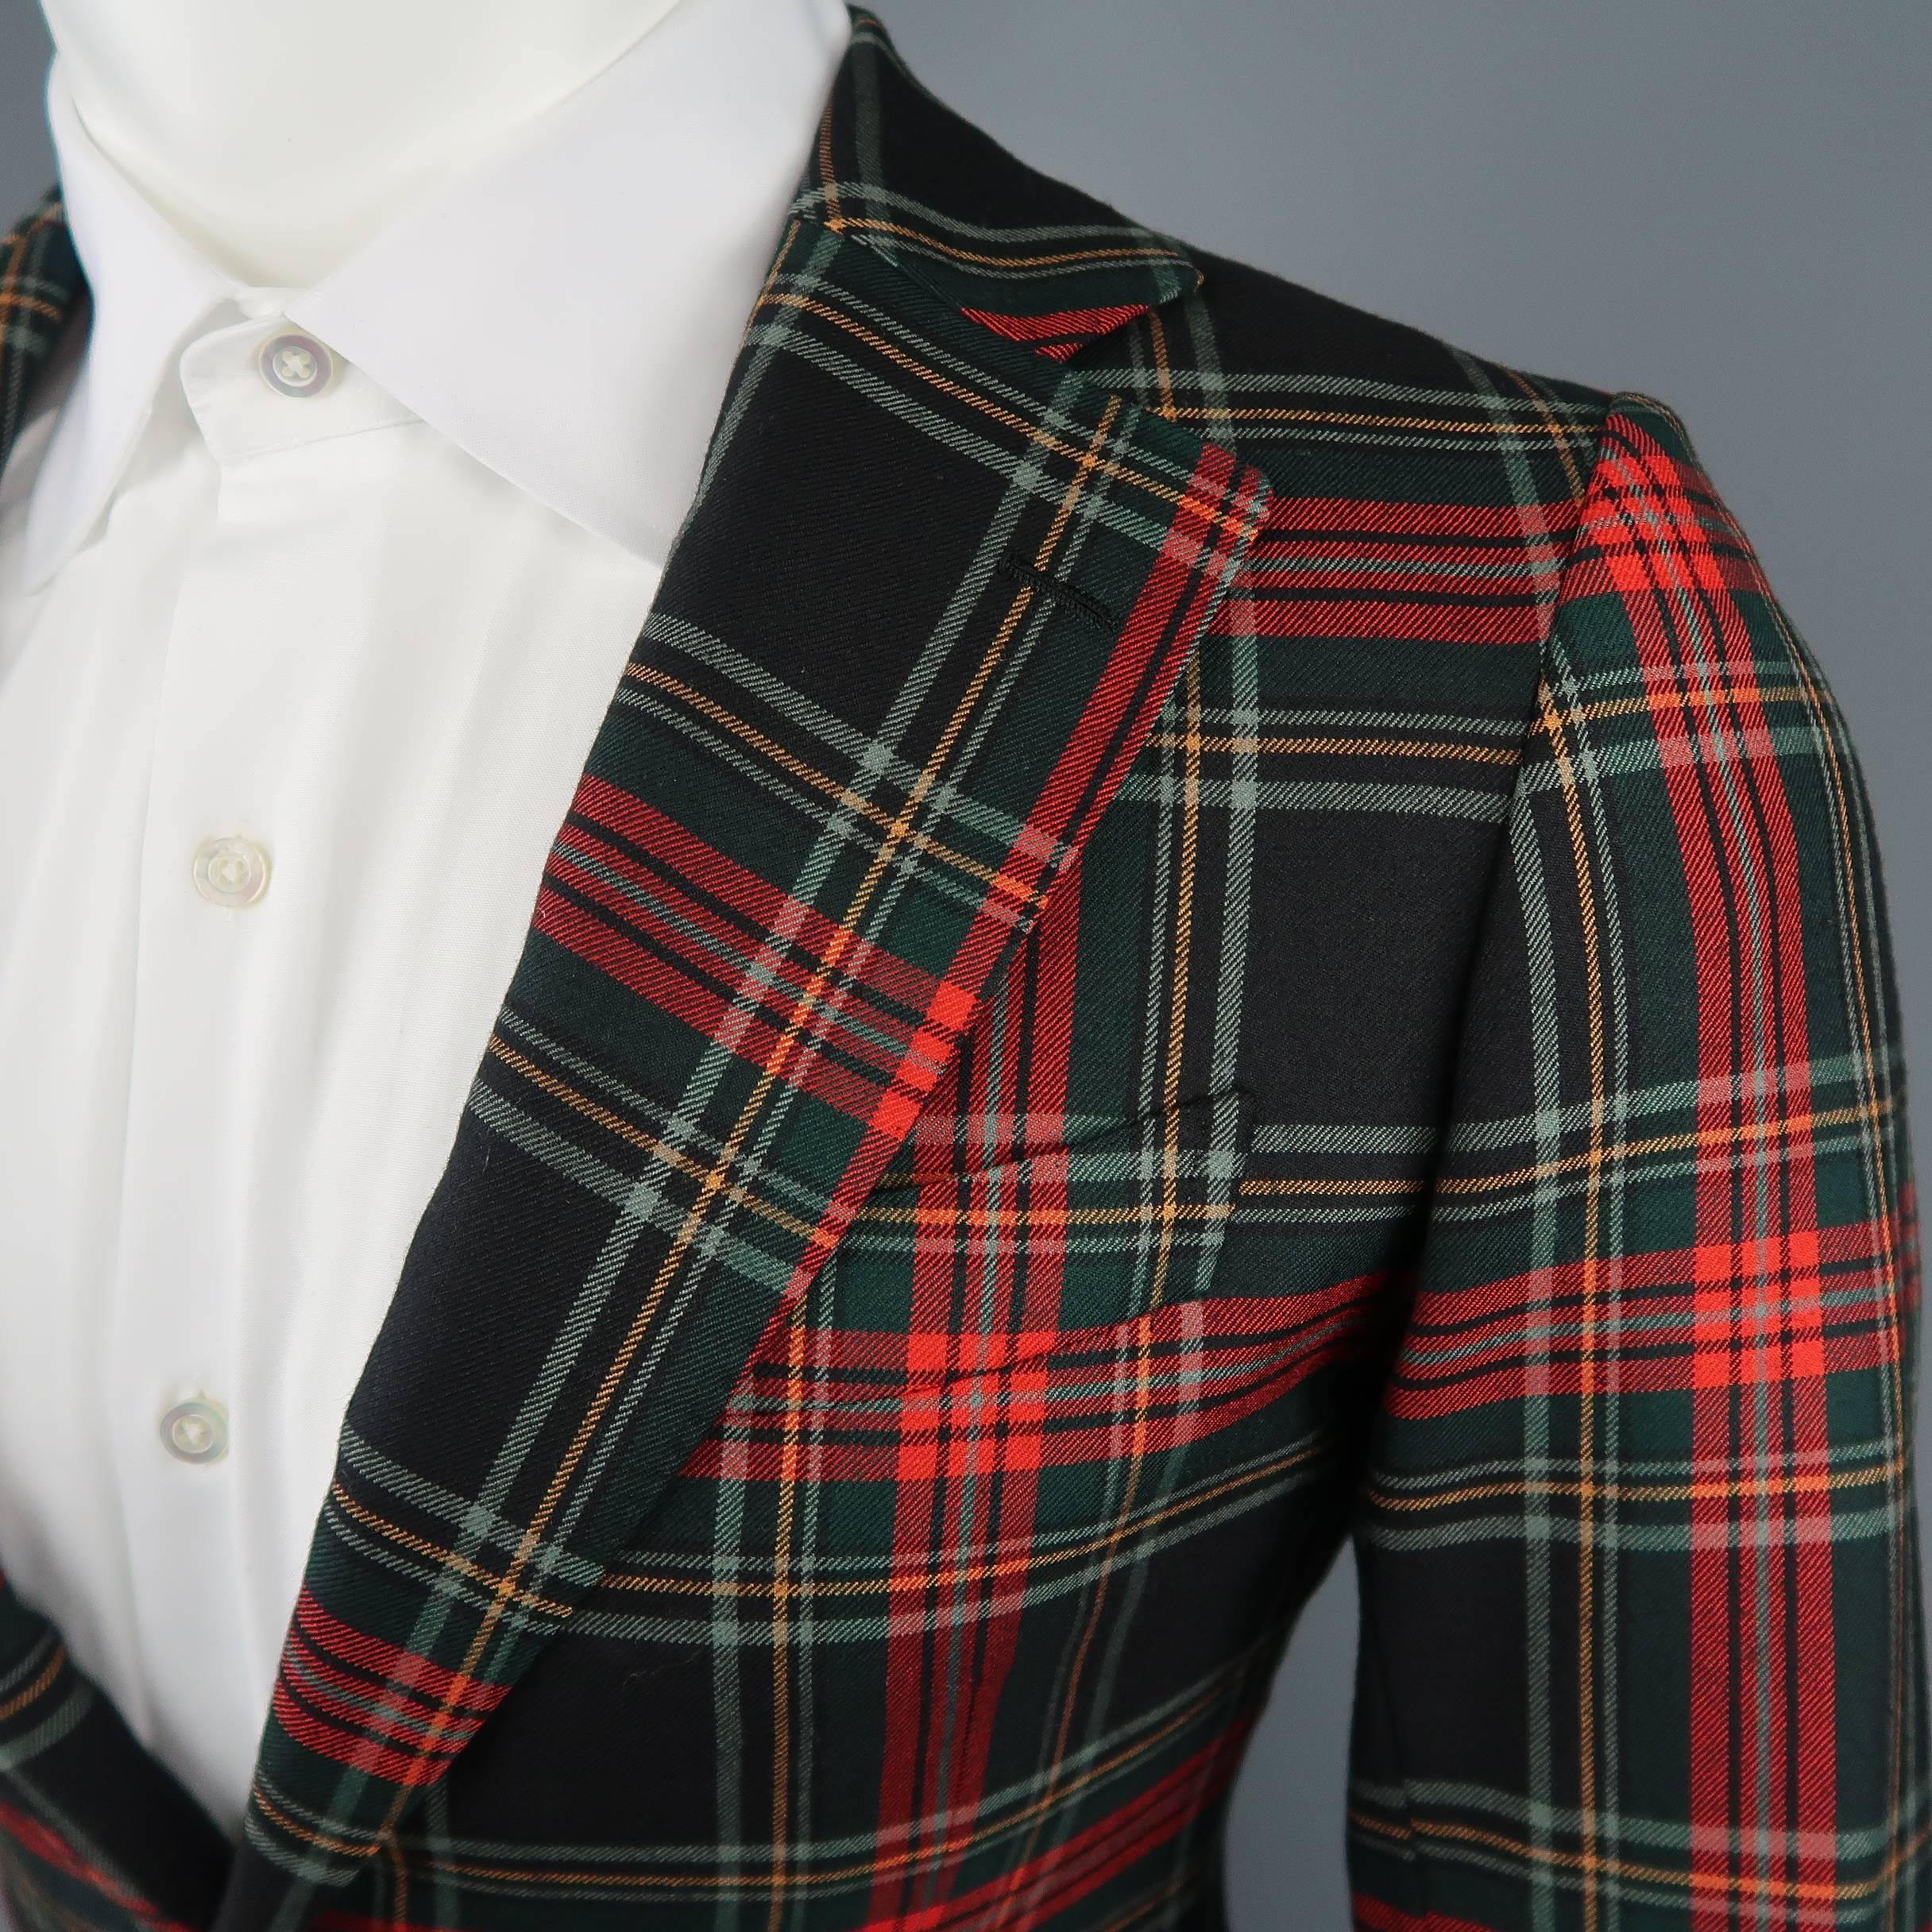 Single breasted UNITED ARROWS sport coat comes in red and black tartan plaid wool twill with a notch lapel, single vented back and two button closure with gold tone metal buttons. Made in Japan.
 
Excellent Pre-Owned Condition.
Marked: 